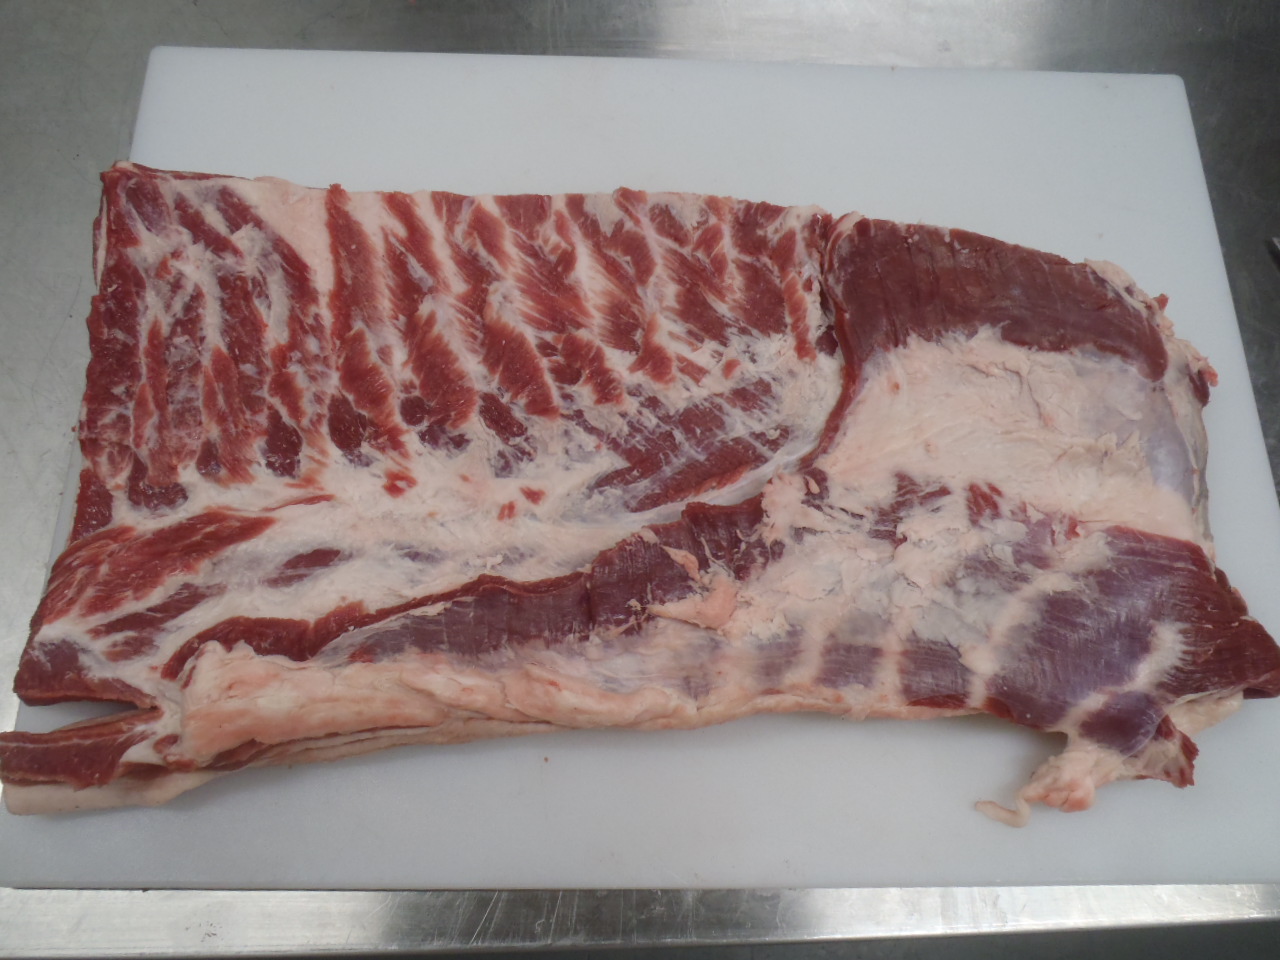 Pork belly, side ribs removed